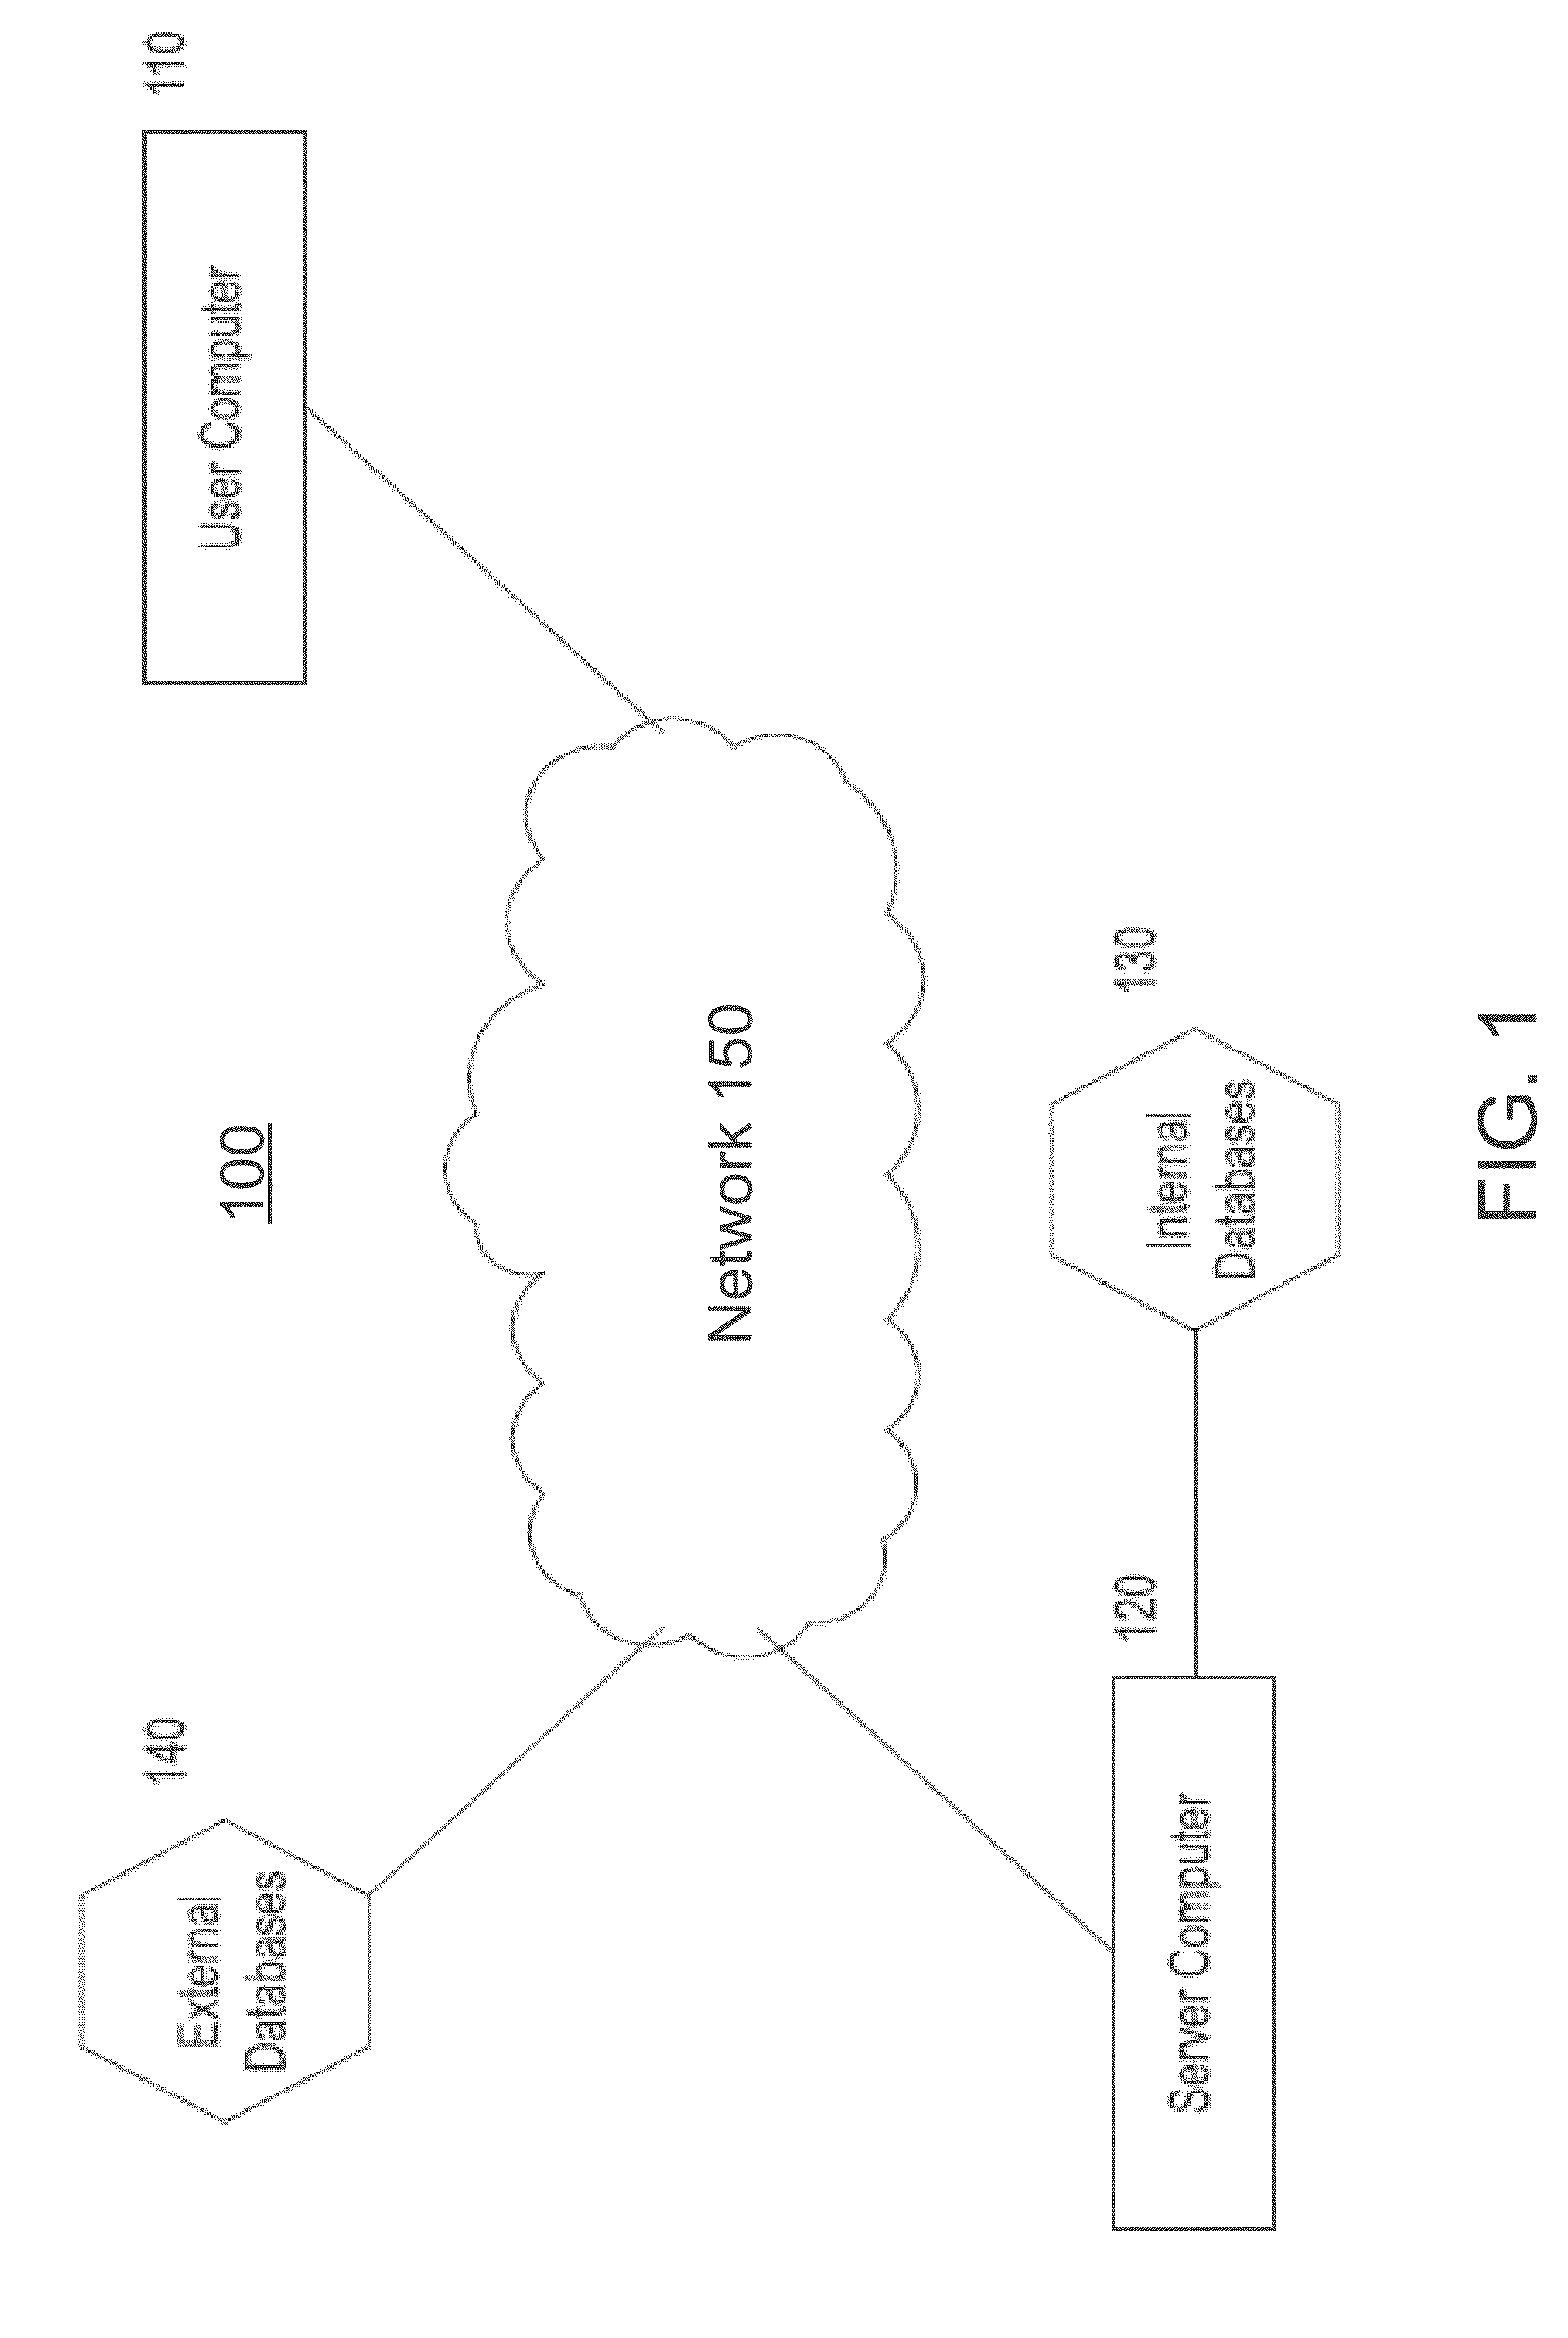 System and method for designing buildings